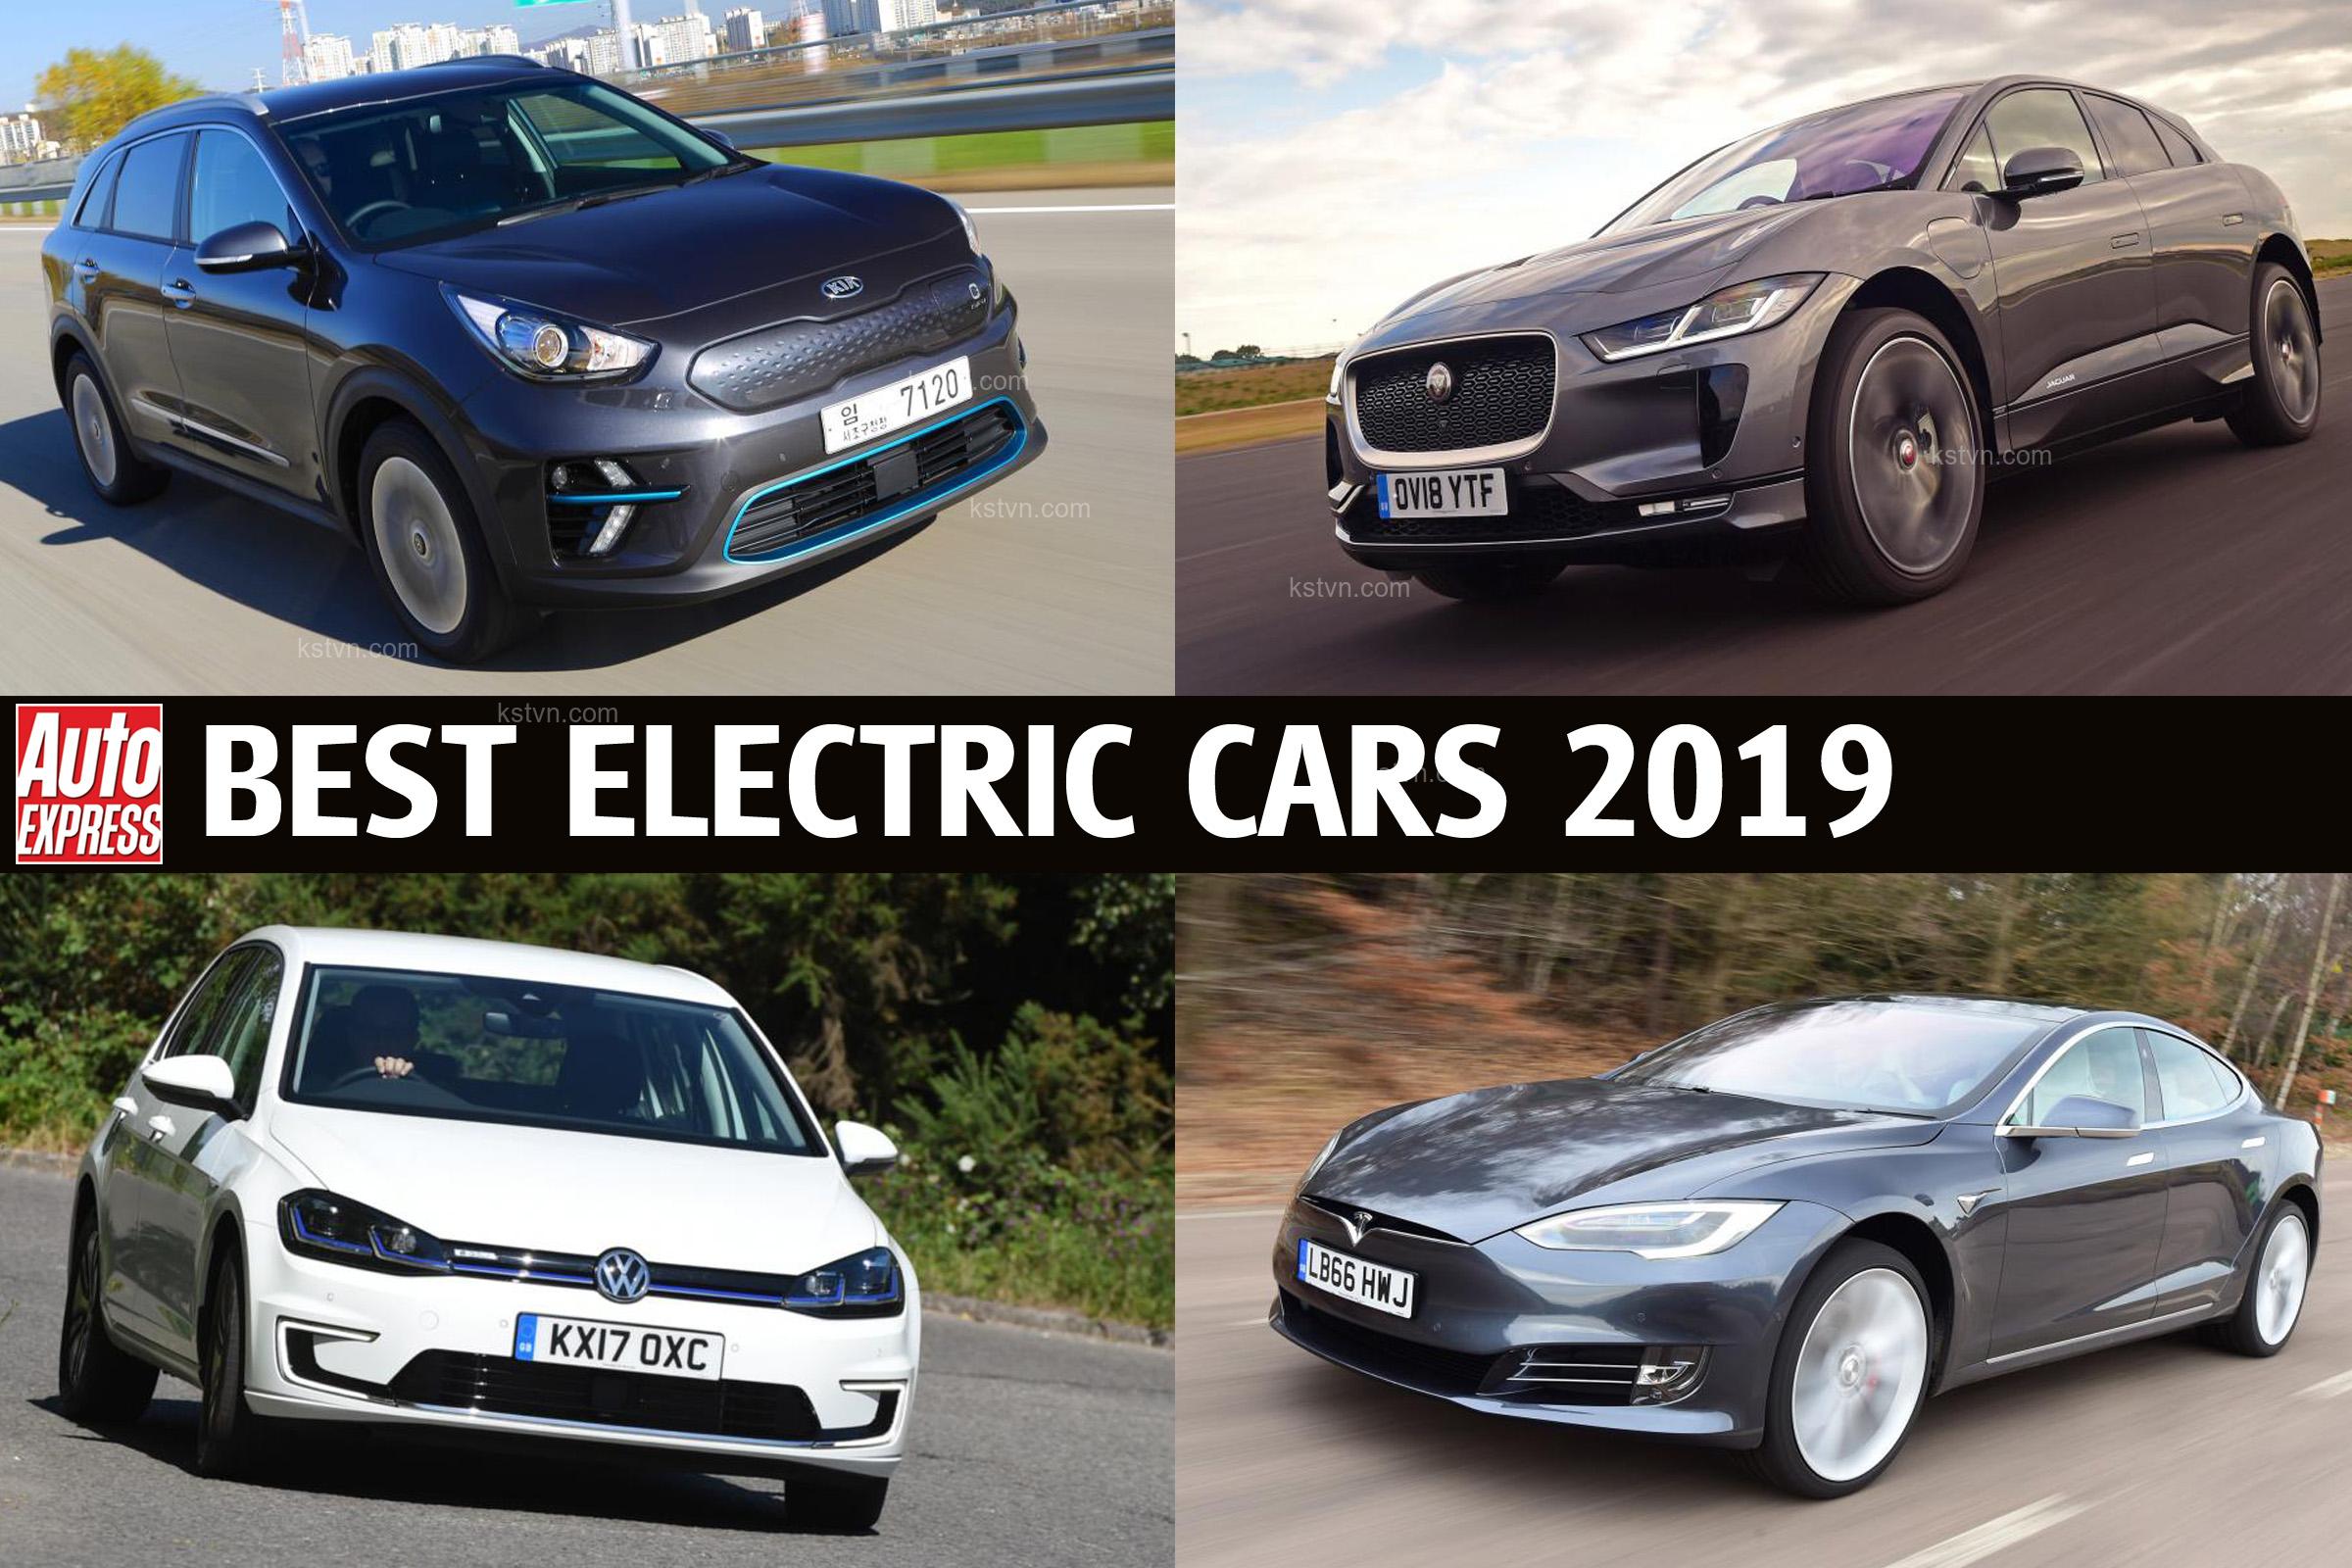 What are electric cars? Electric cars